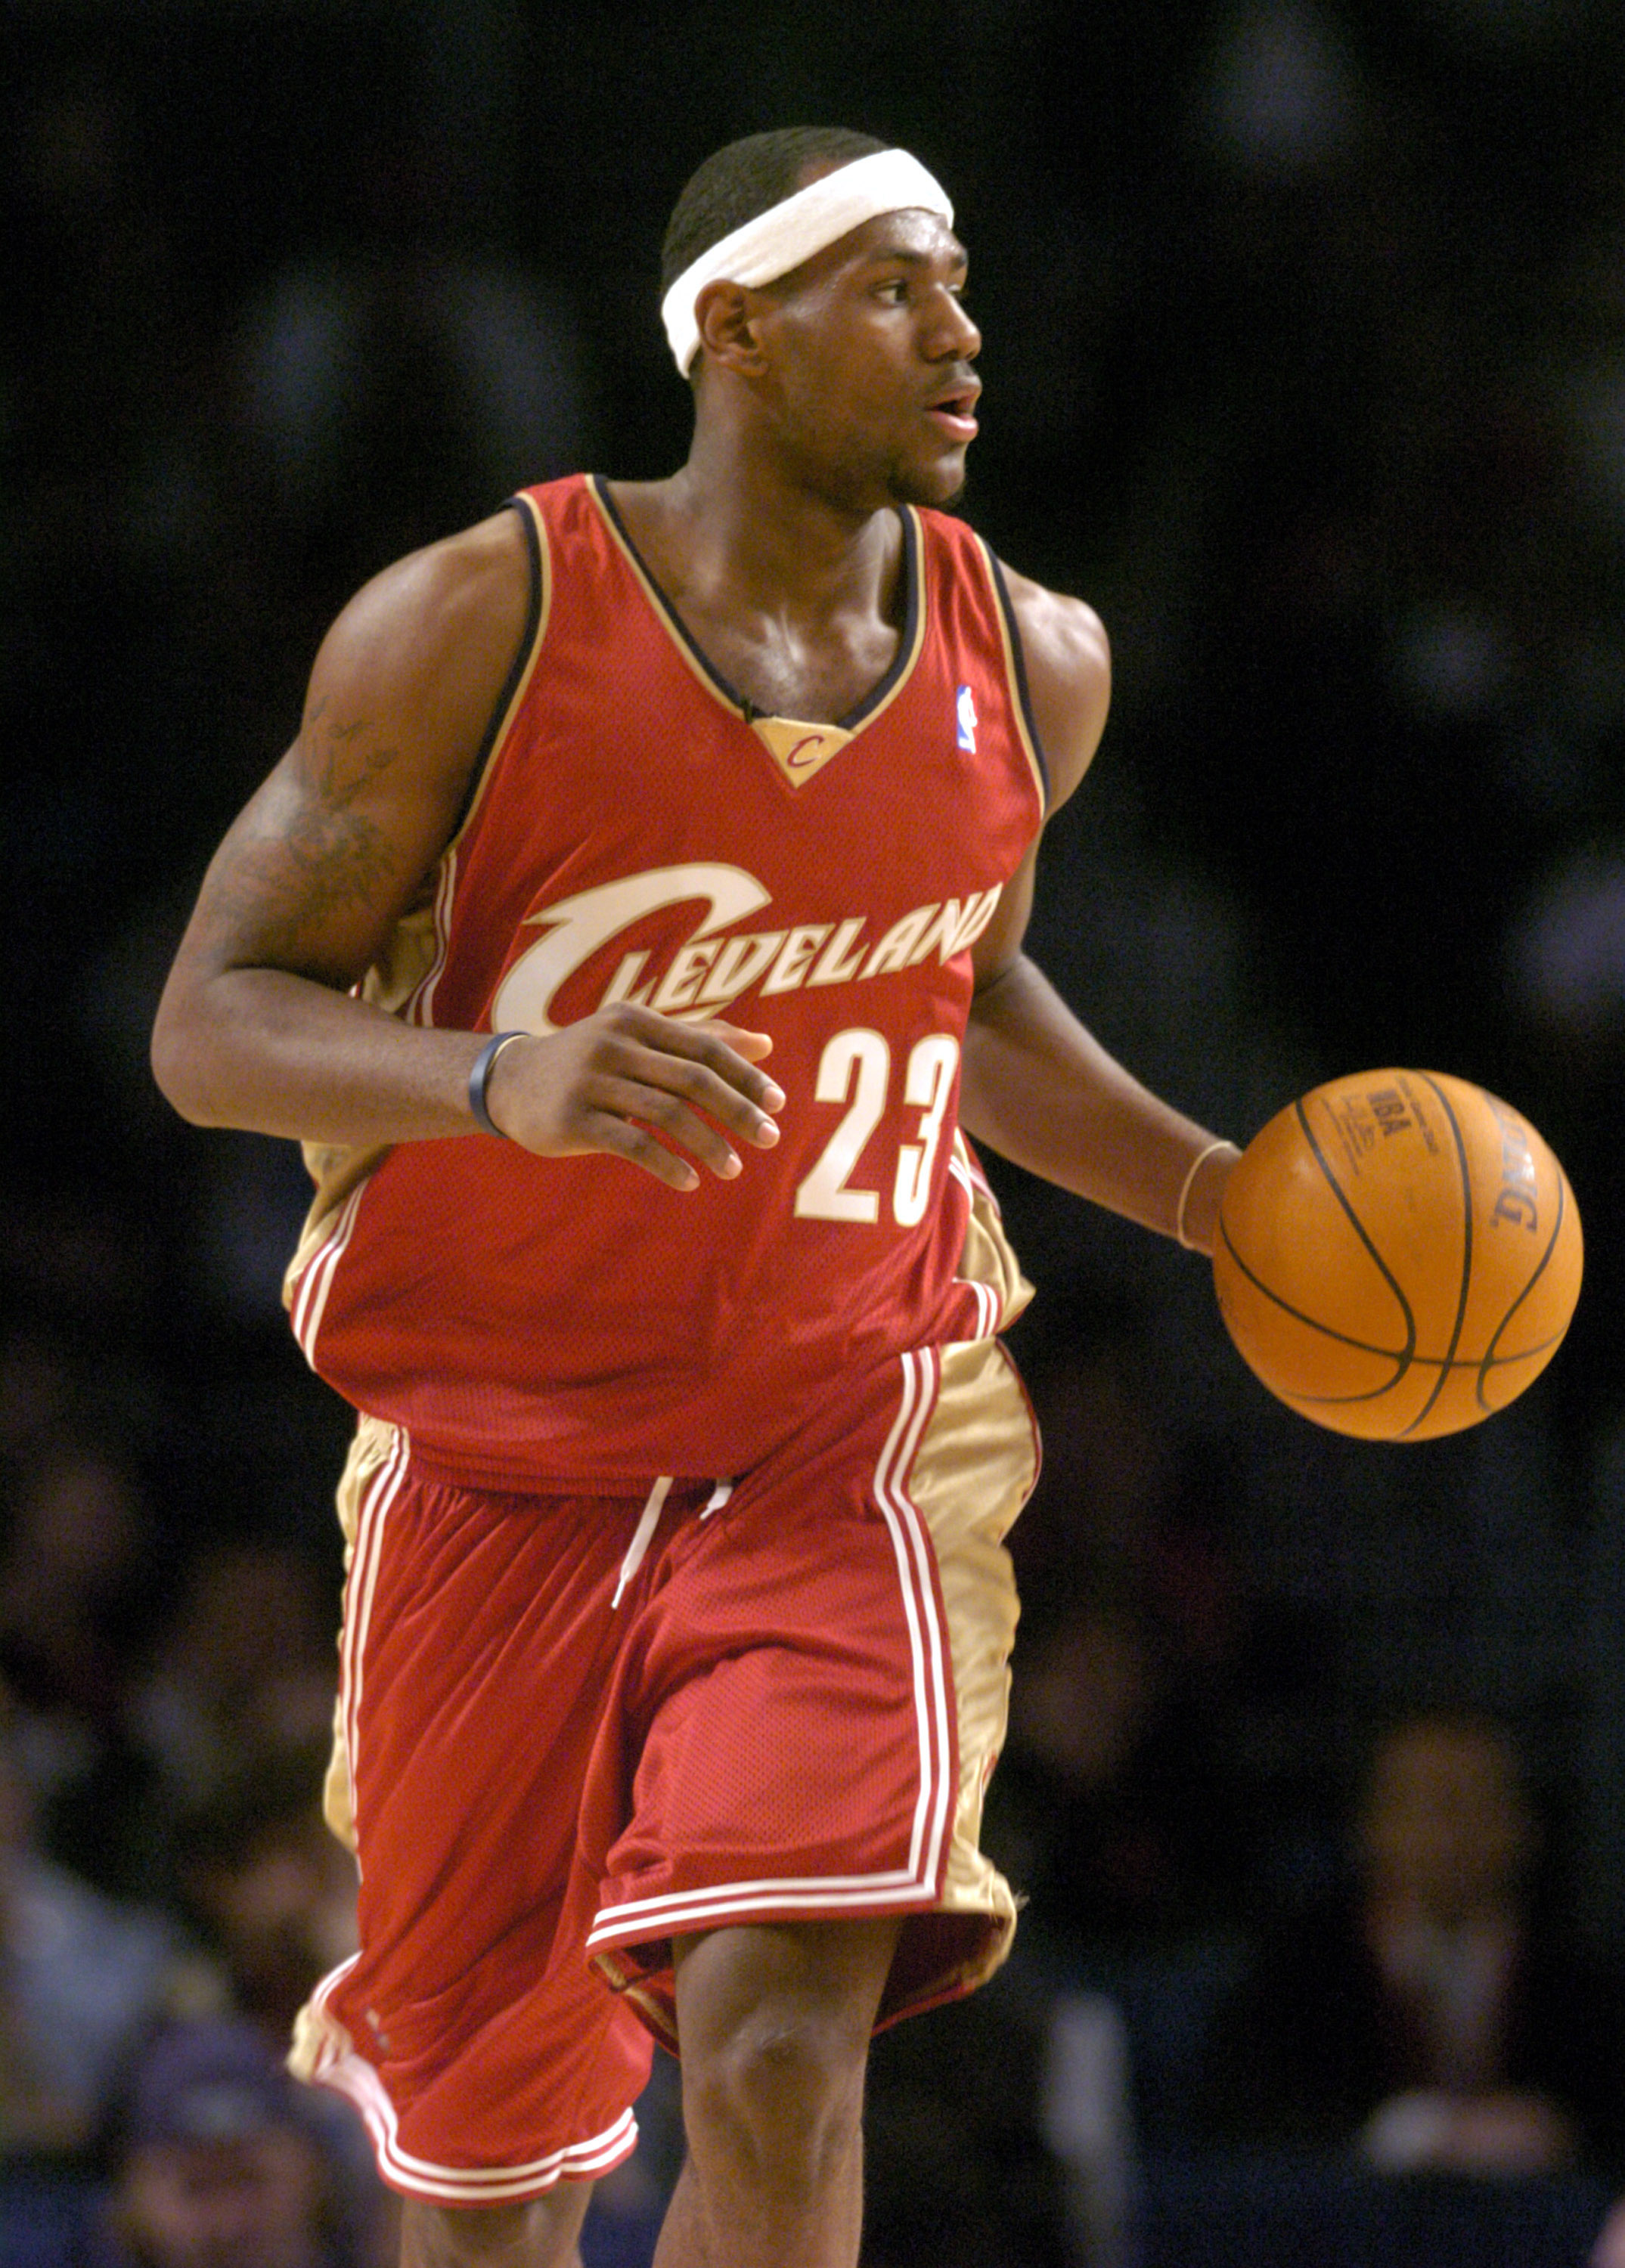 This is a photo of LeBron James in his 2003 season with the Cavs.